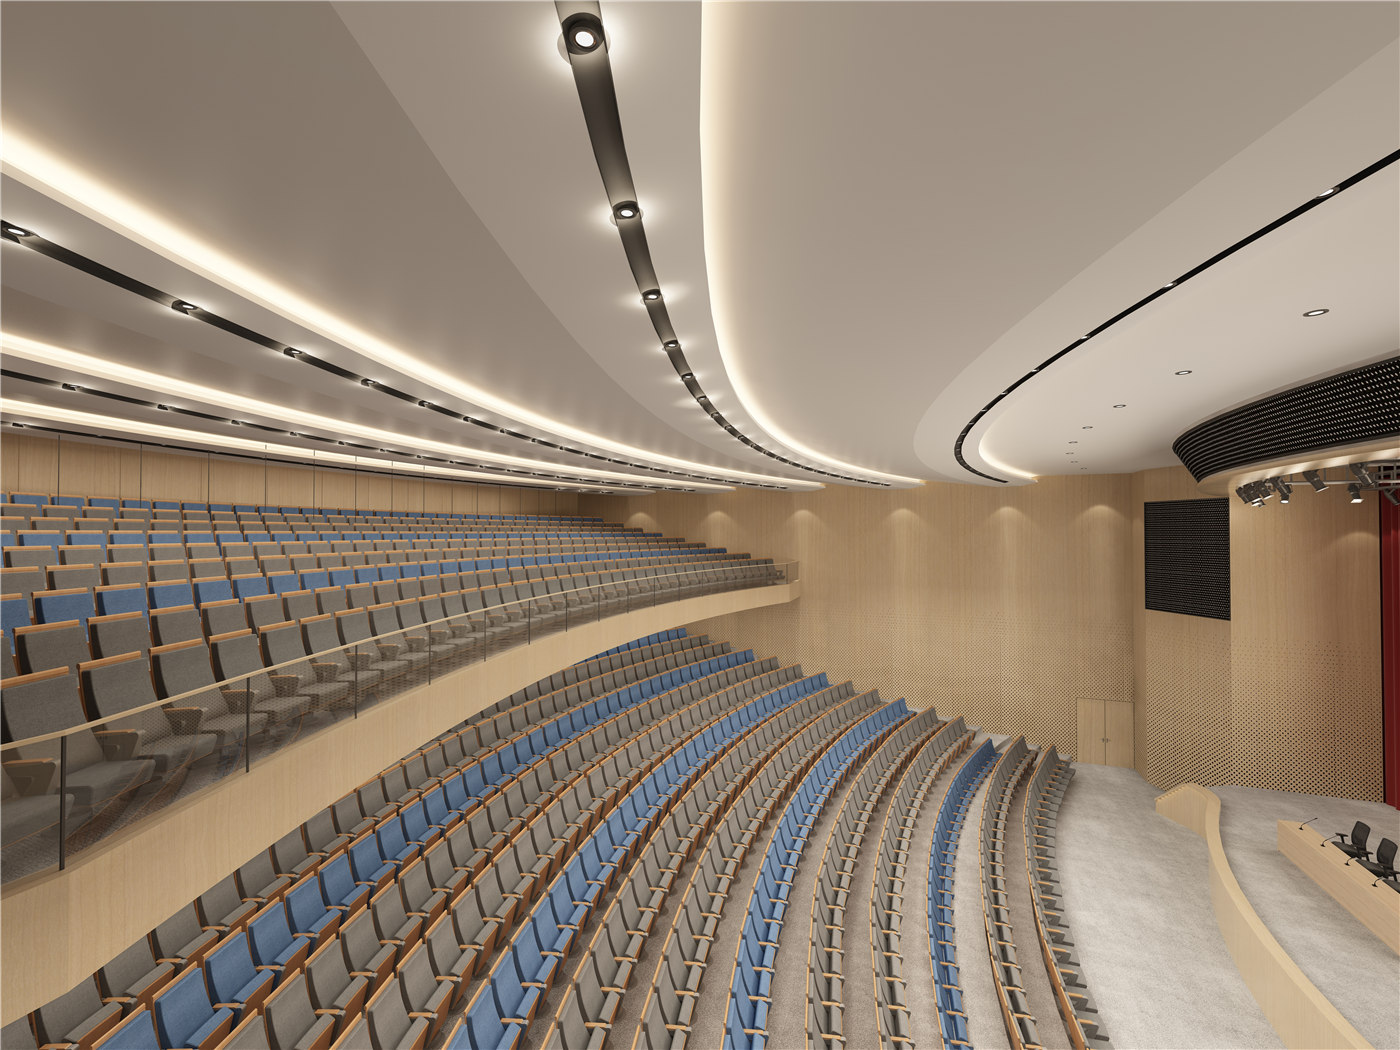 Enhance the Aesthetics of Your Venue with Stylish Auditorium Seating from Leading Manufacturers12